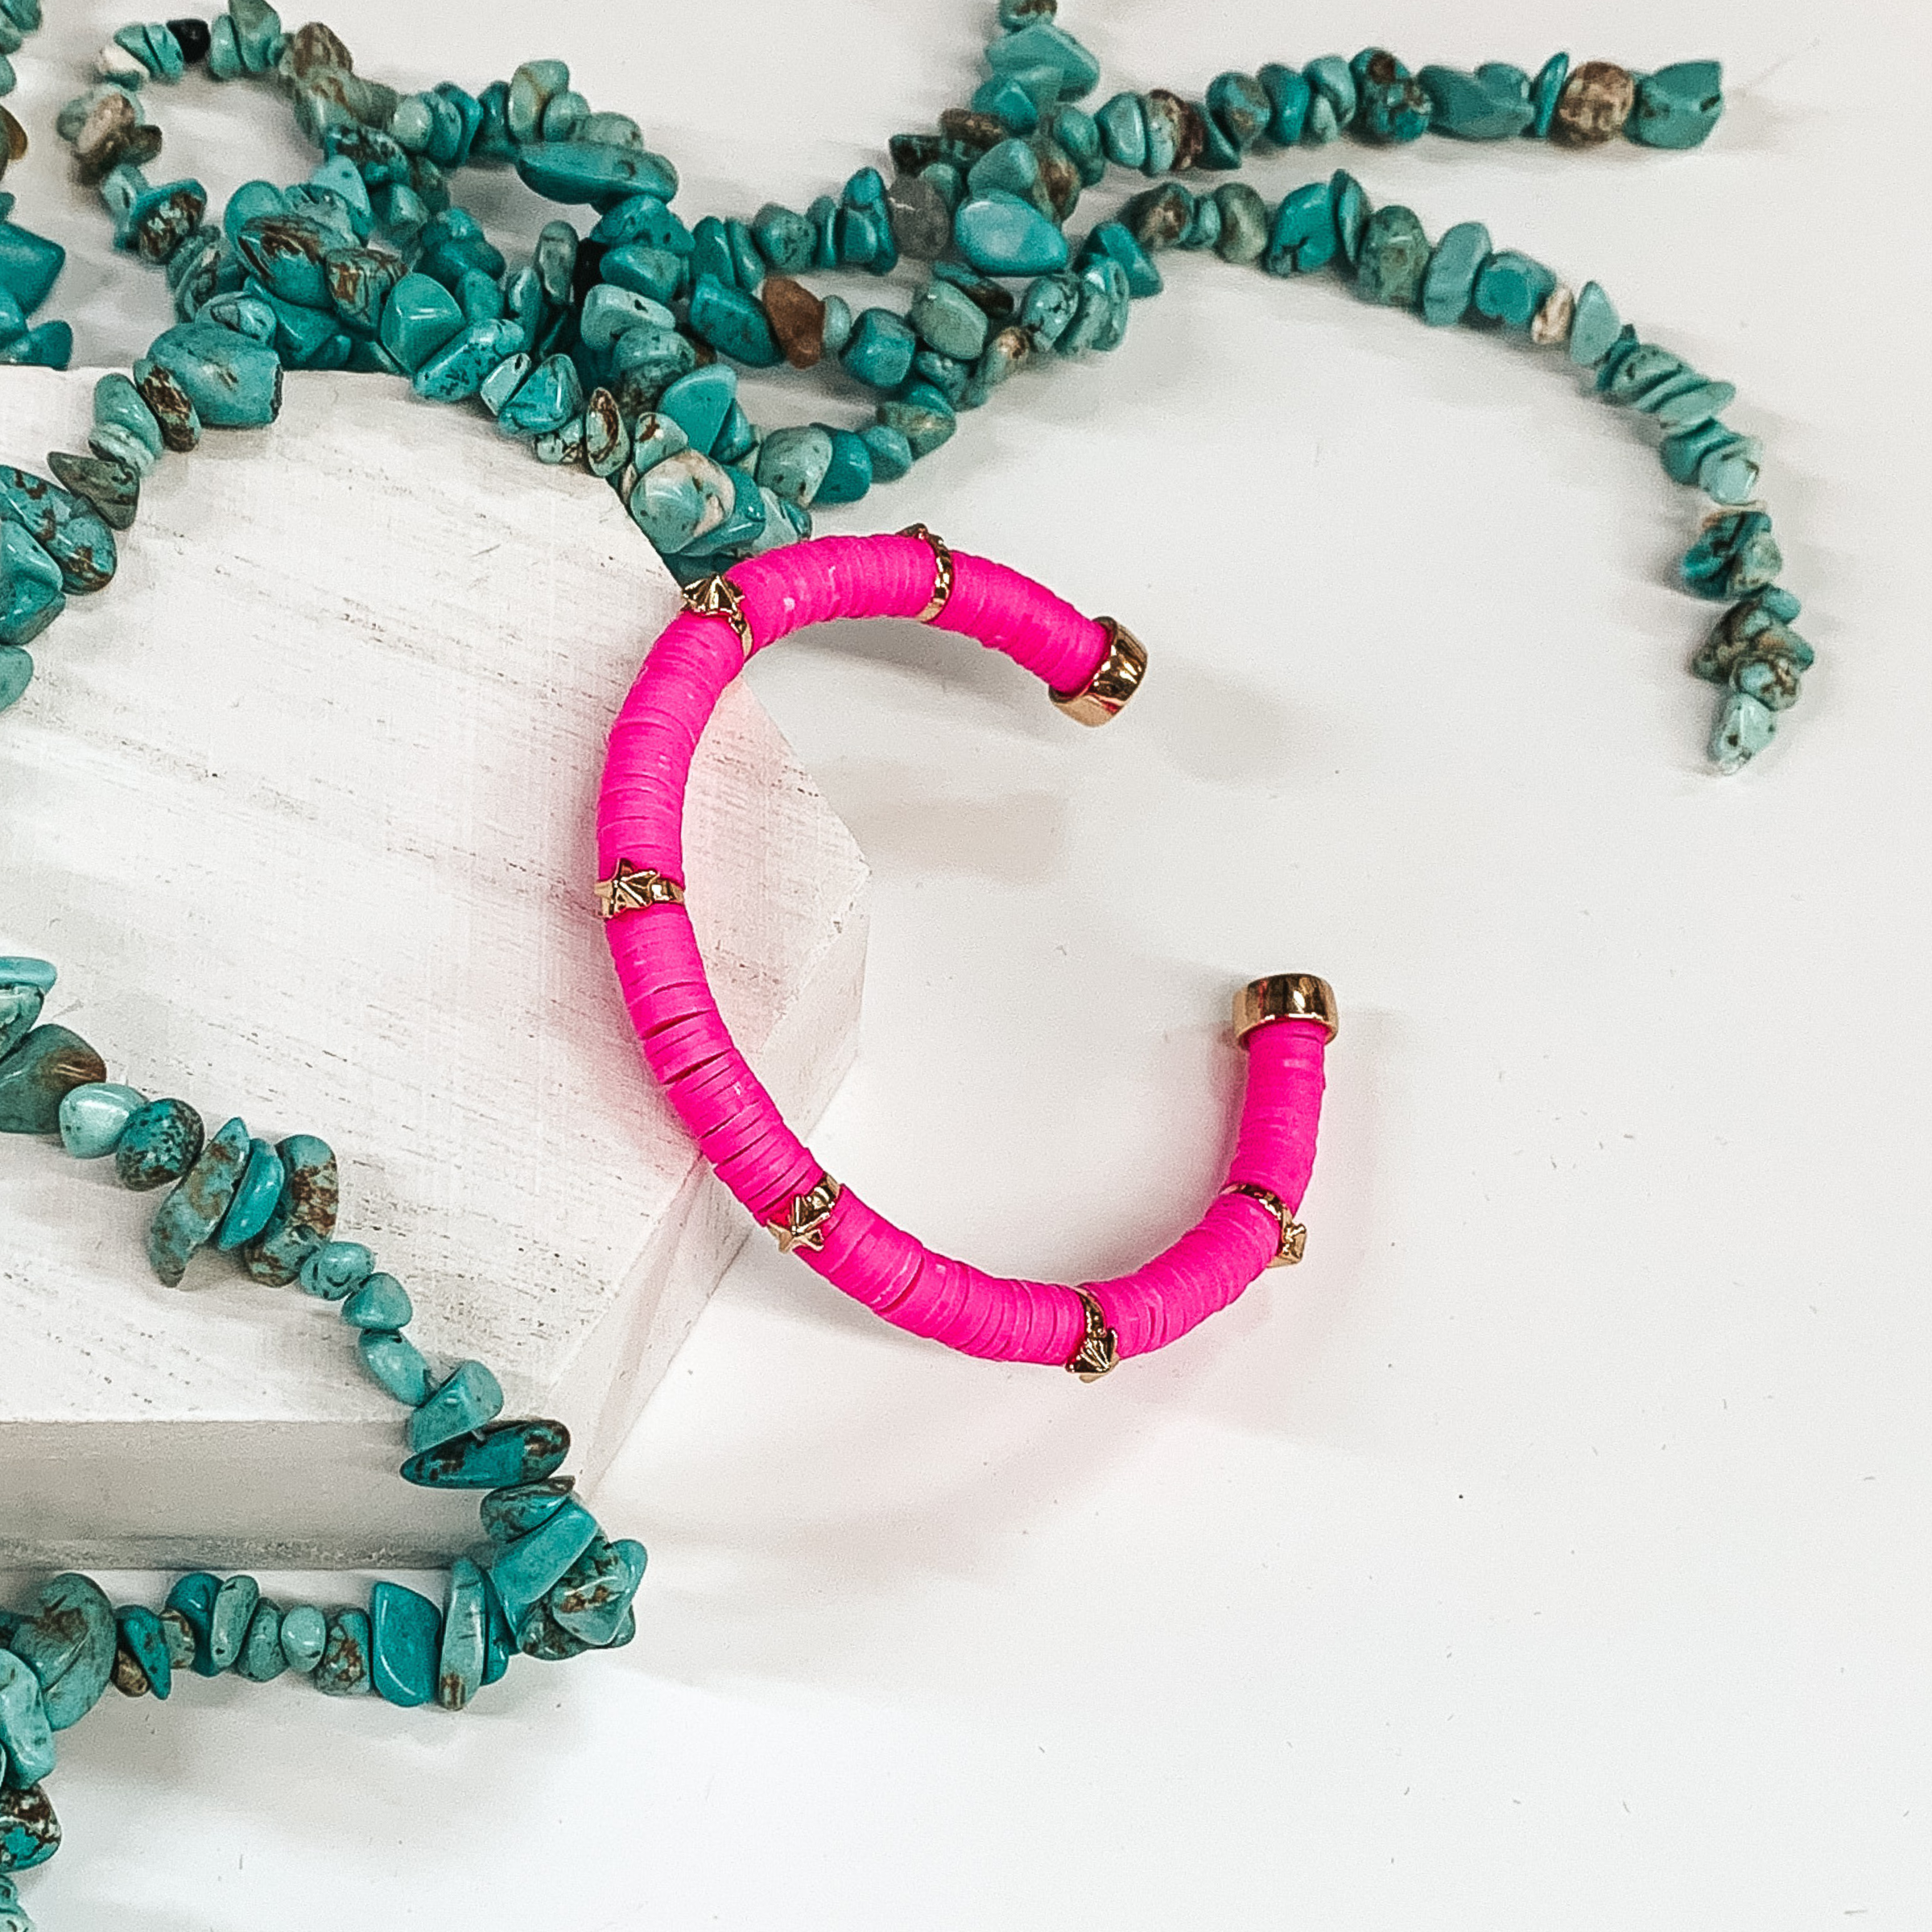 Lost in Paradise Disc Bead Bracelet in Hot Pink - Giddy Up Glamour Boutique